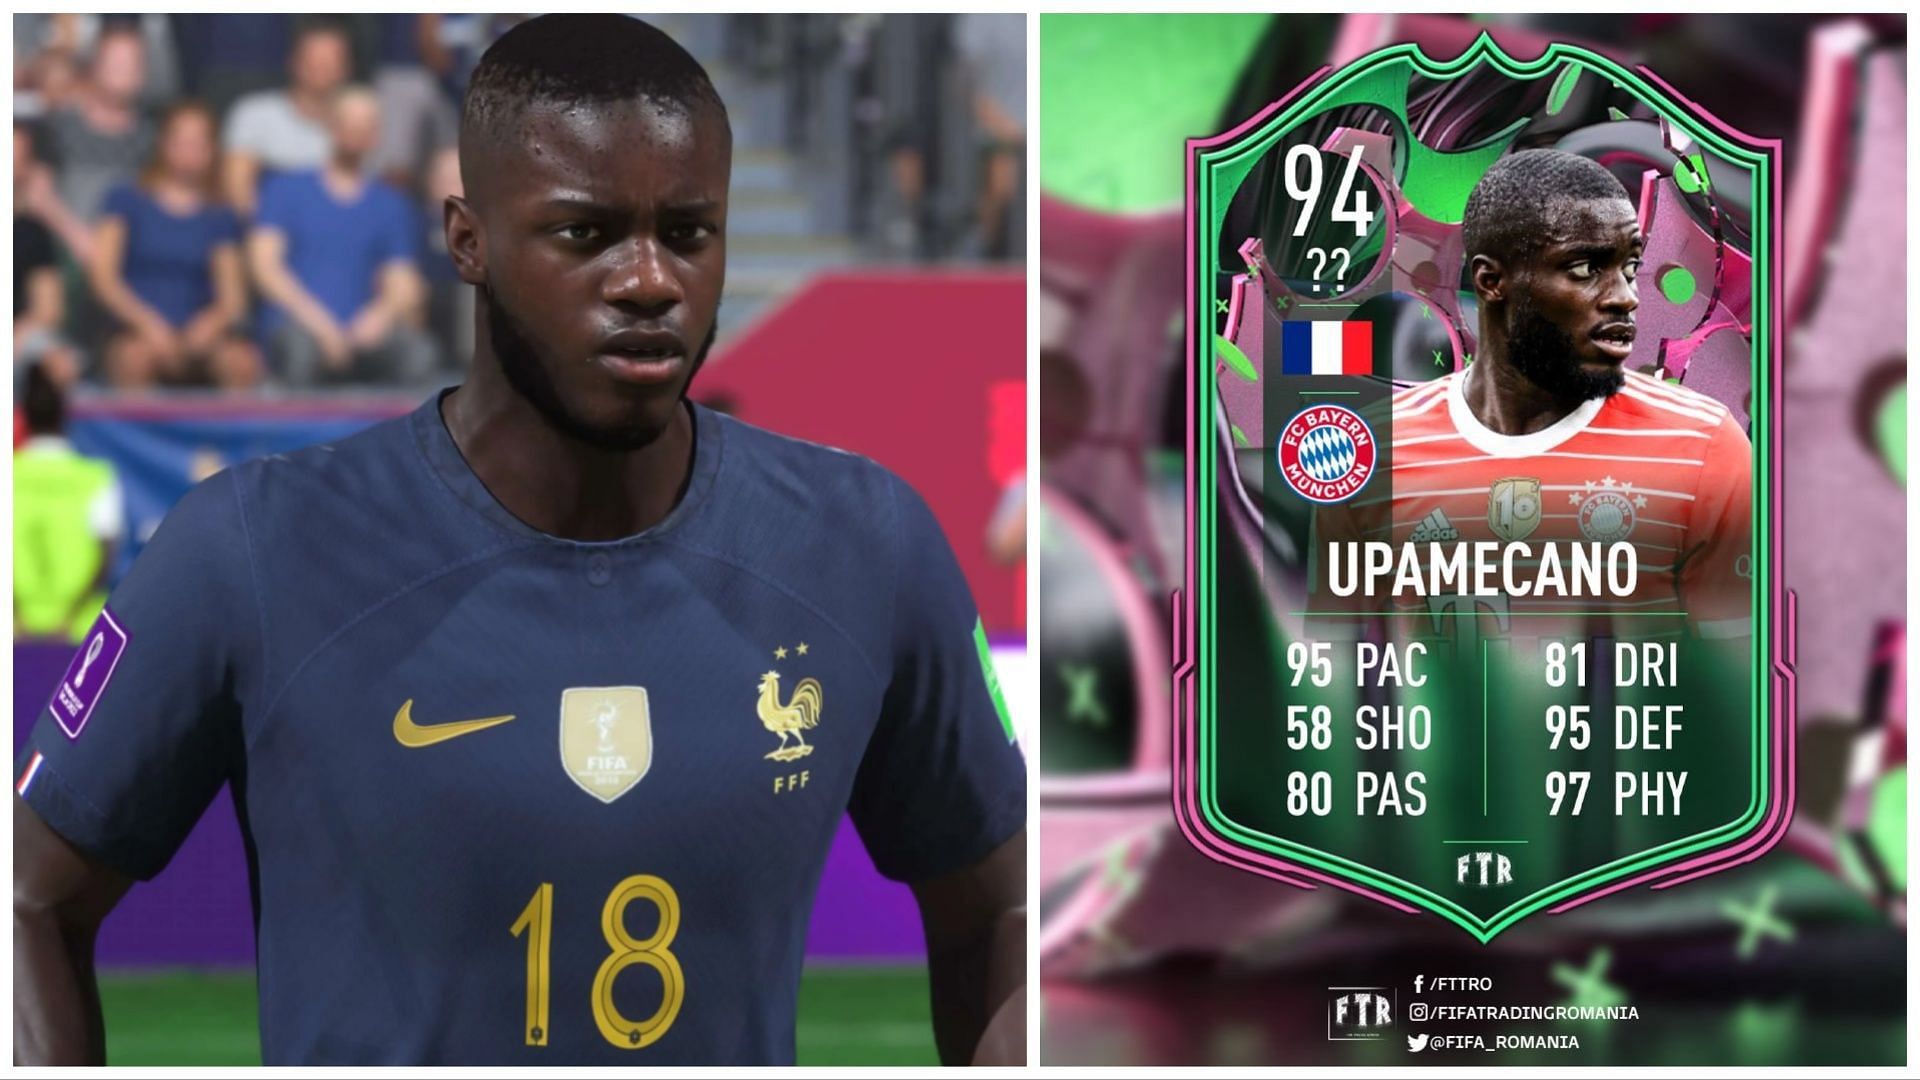 Shapeshifters Upamecano has been leaked (Images via EA Sports and Twitter/FIFATradingRomania)